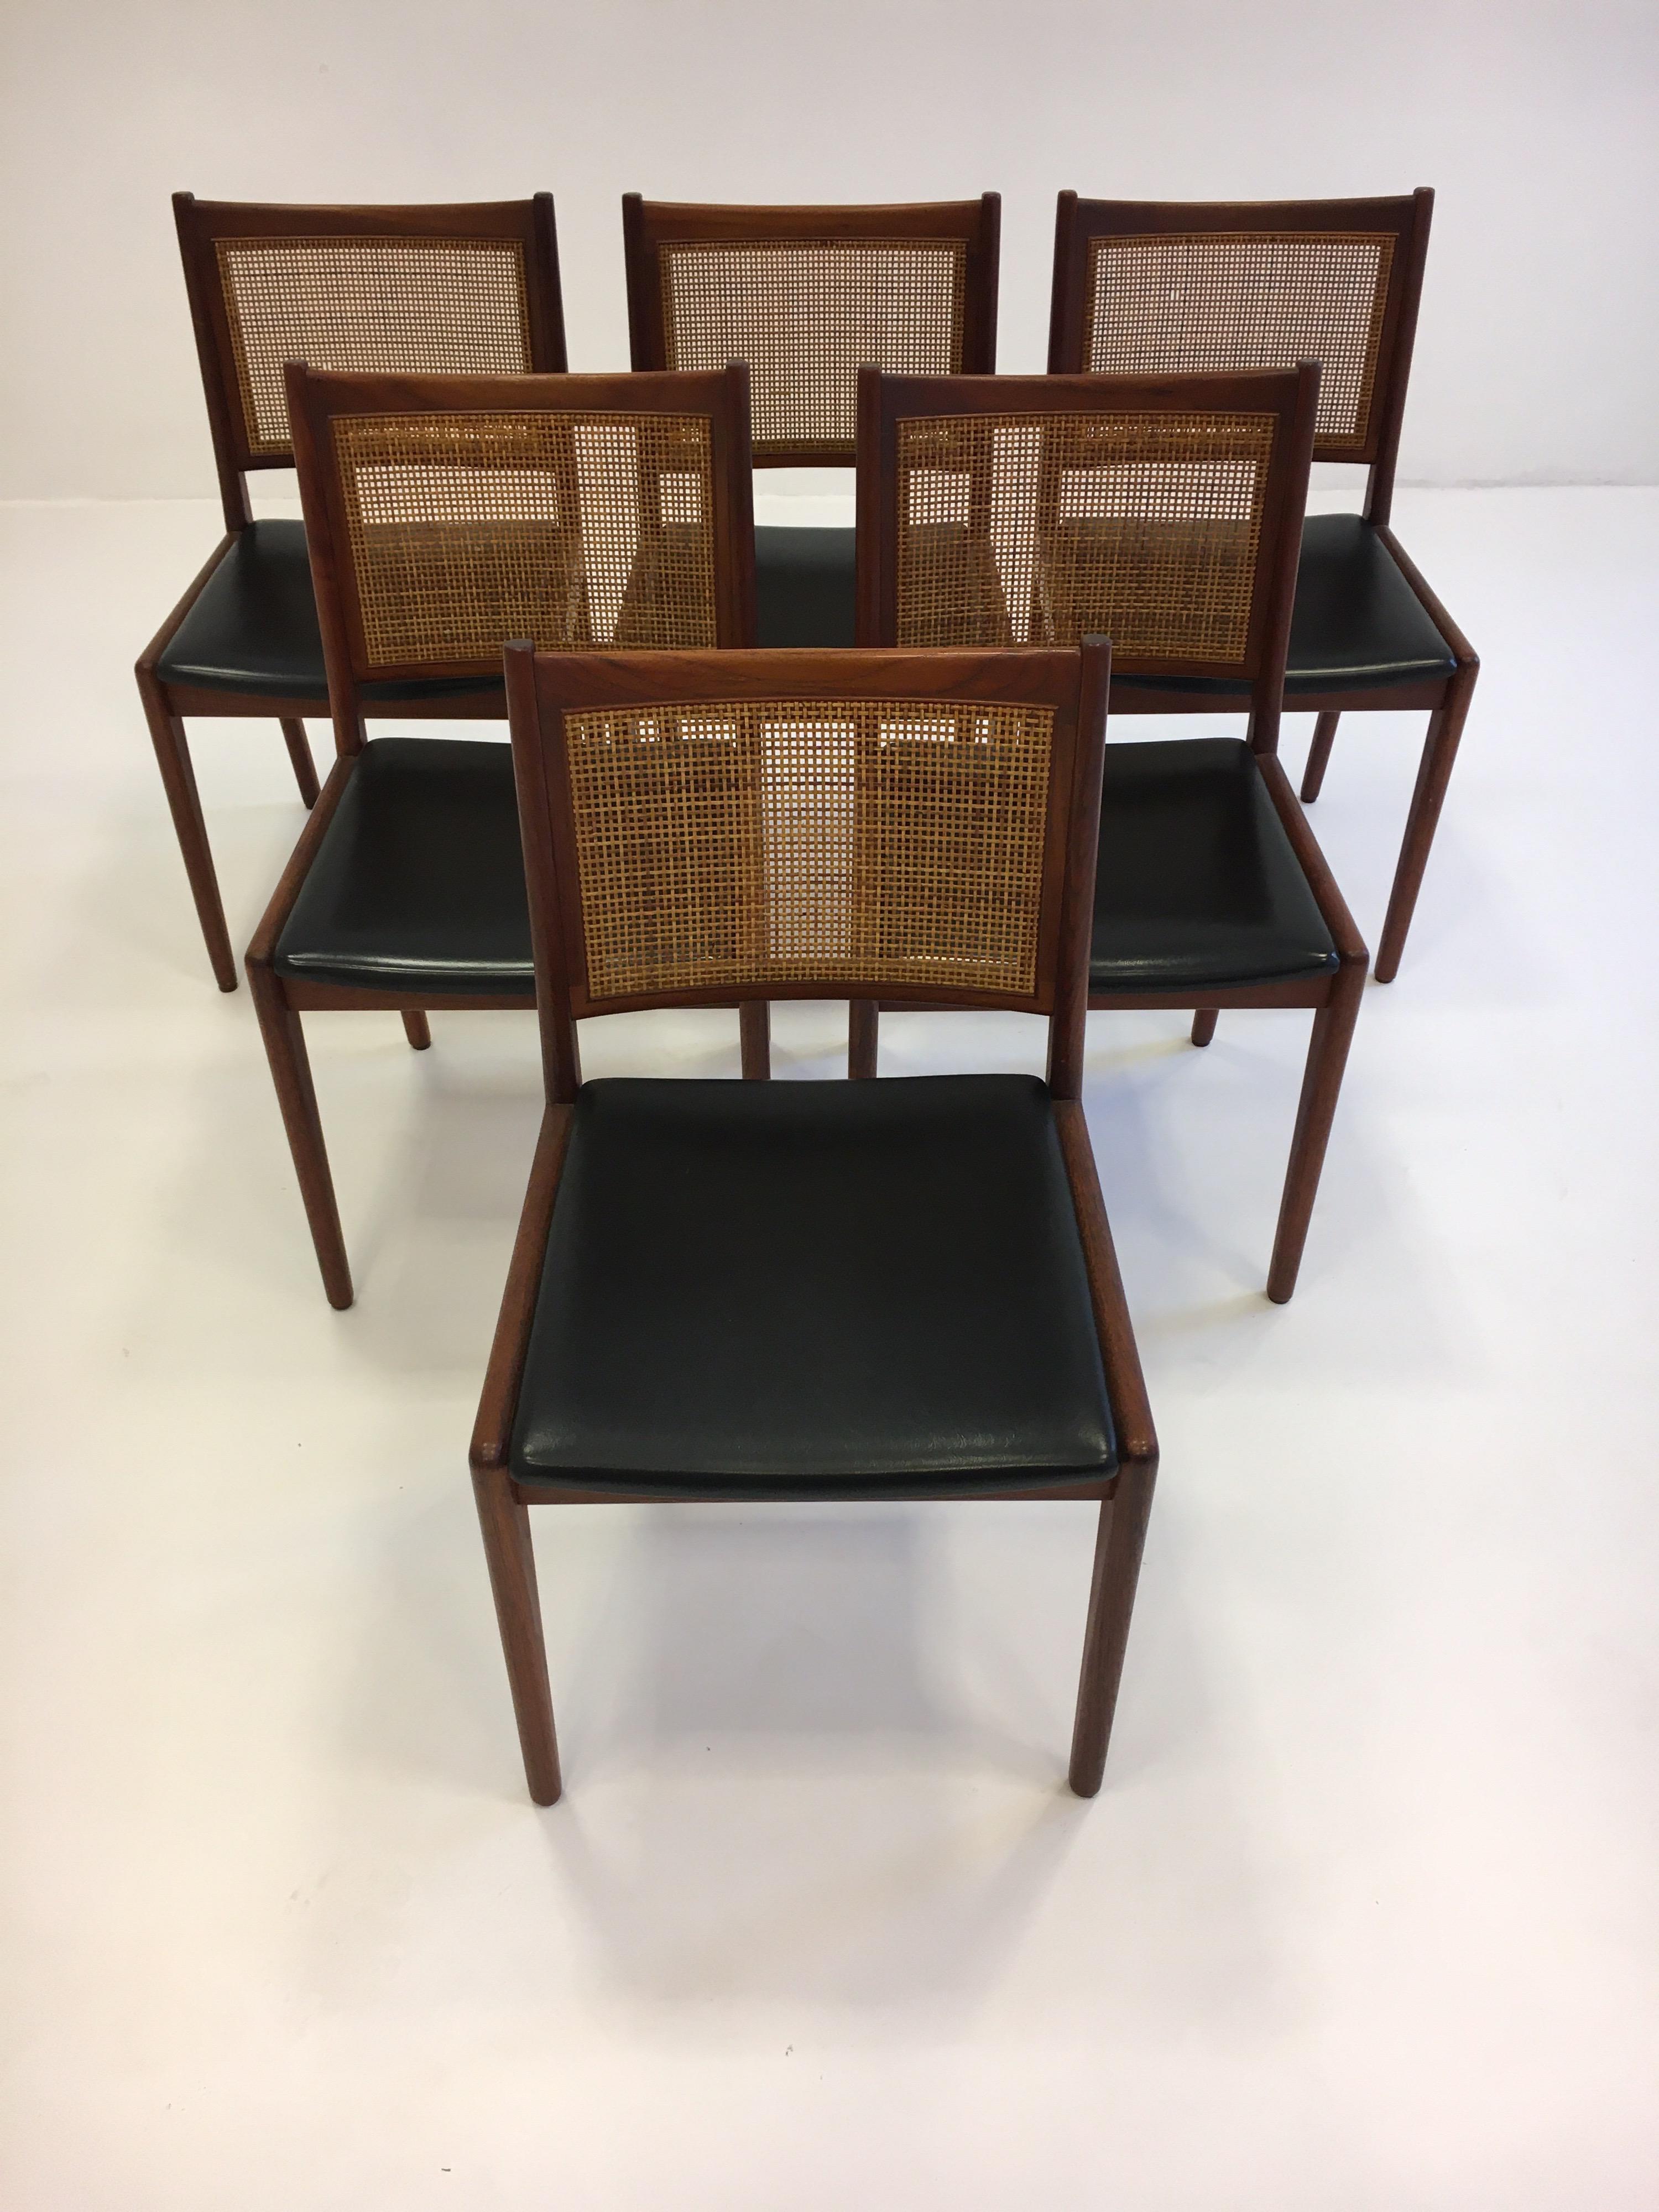 Mid-Century Modern Karl-Erik Ekselius Set of Six Dining Chairs in Teak and Cane, Sweden, 1950s